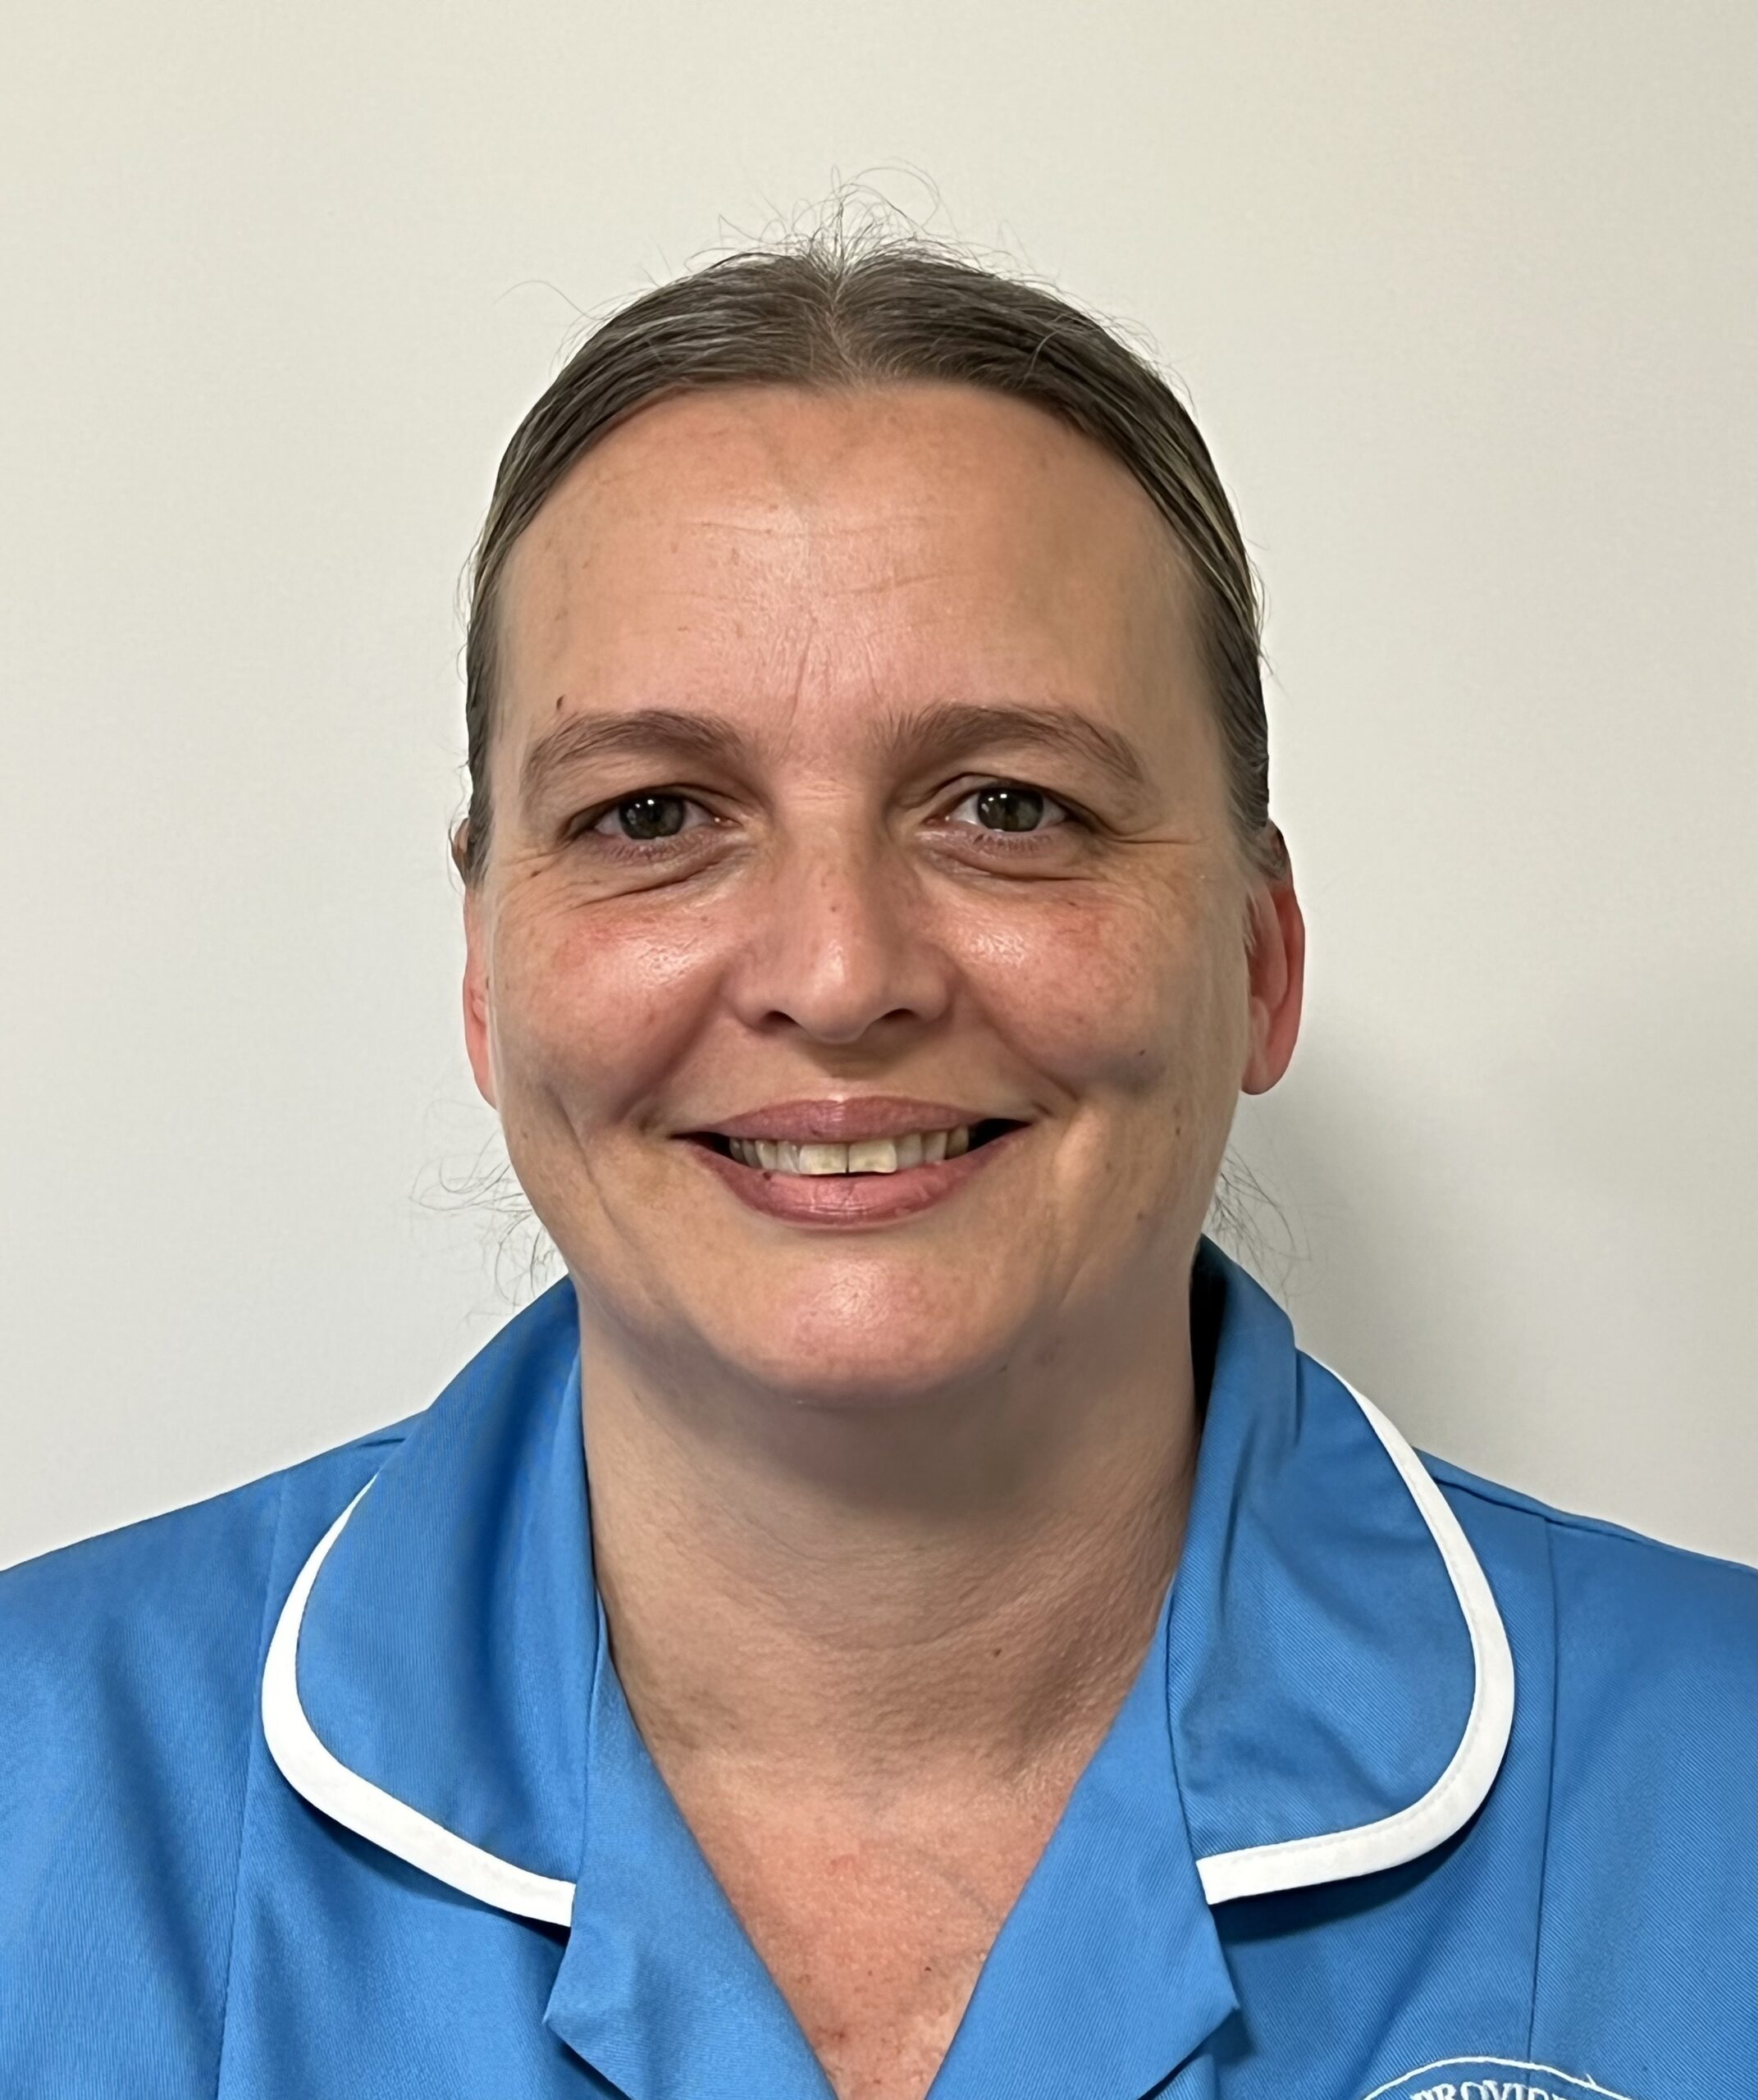 Alison - Senior Care Assistant at Hazelwood Care Home